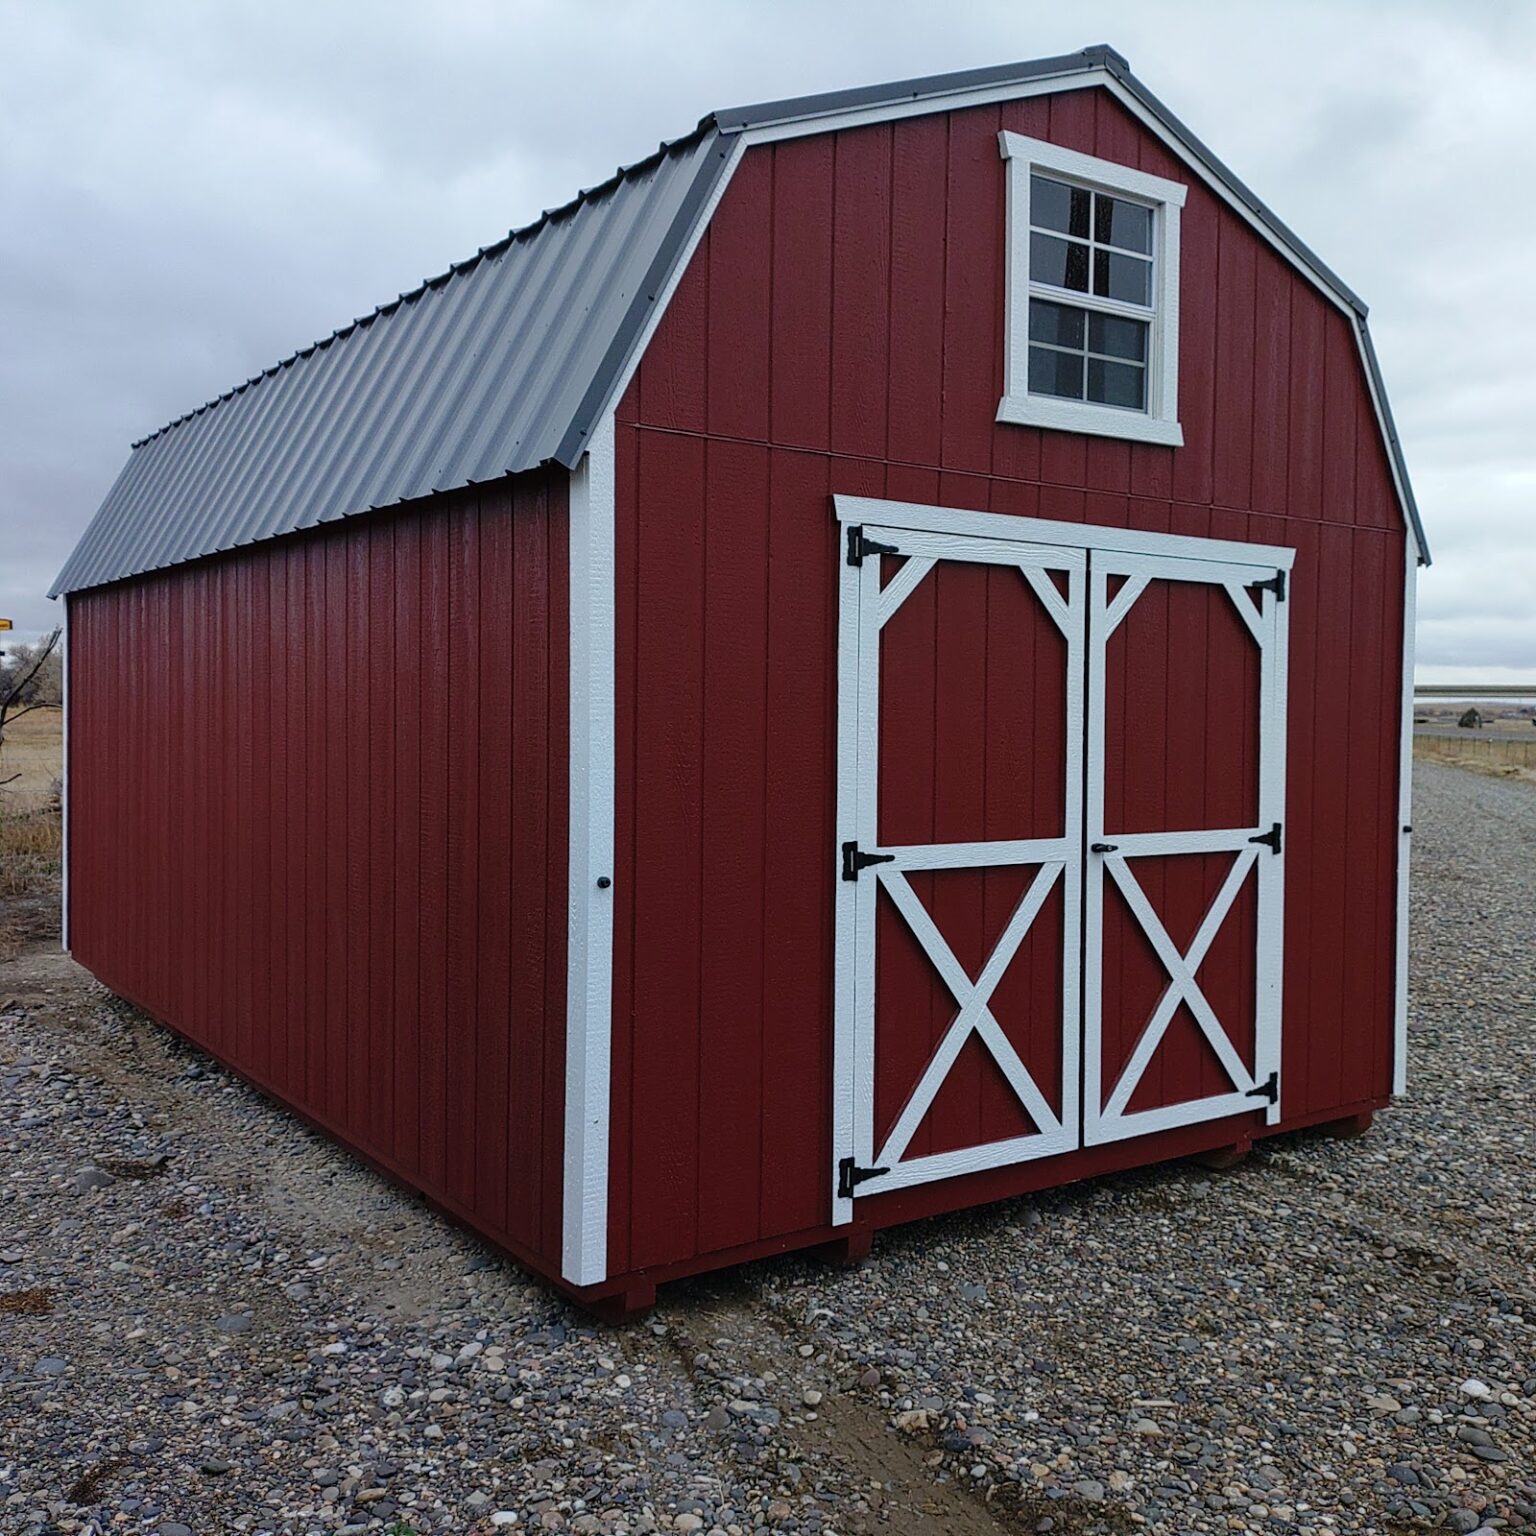 A stunning red and white 12x20 barn with a grey roof, a window in the gable and double barn doors beneath the window.